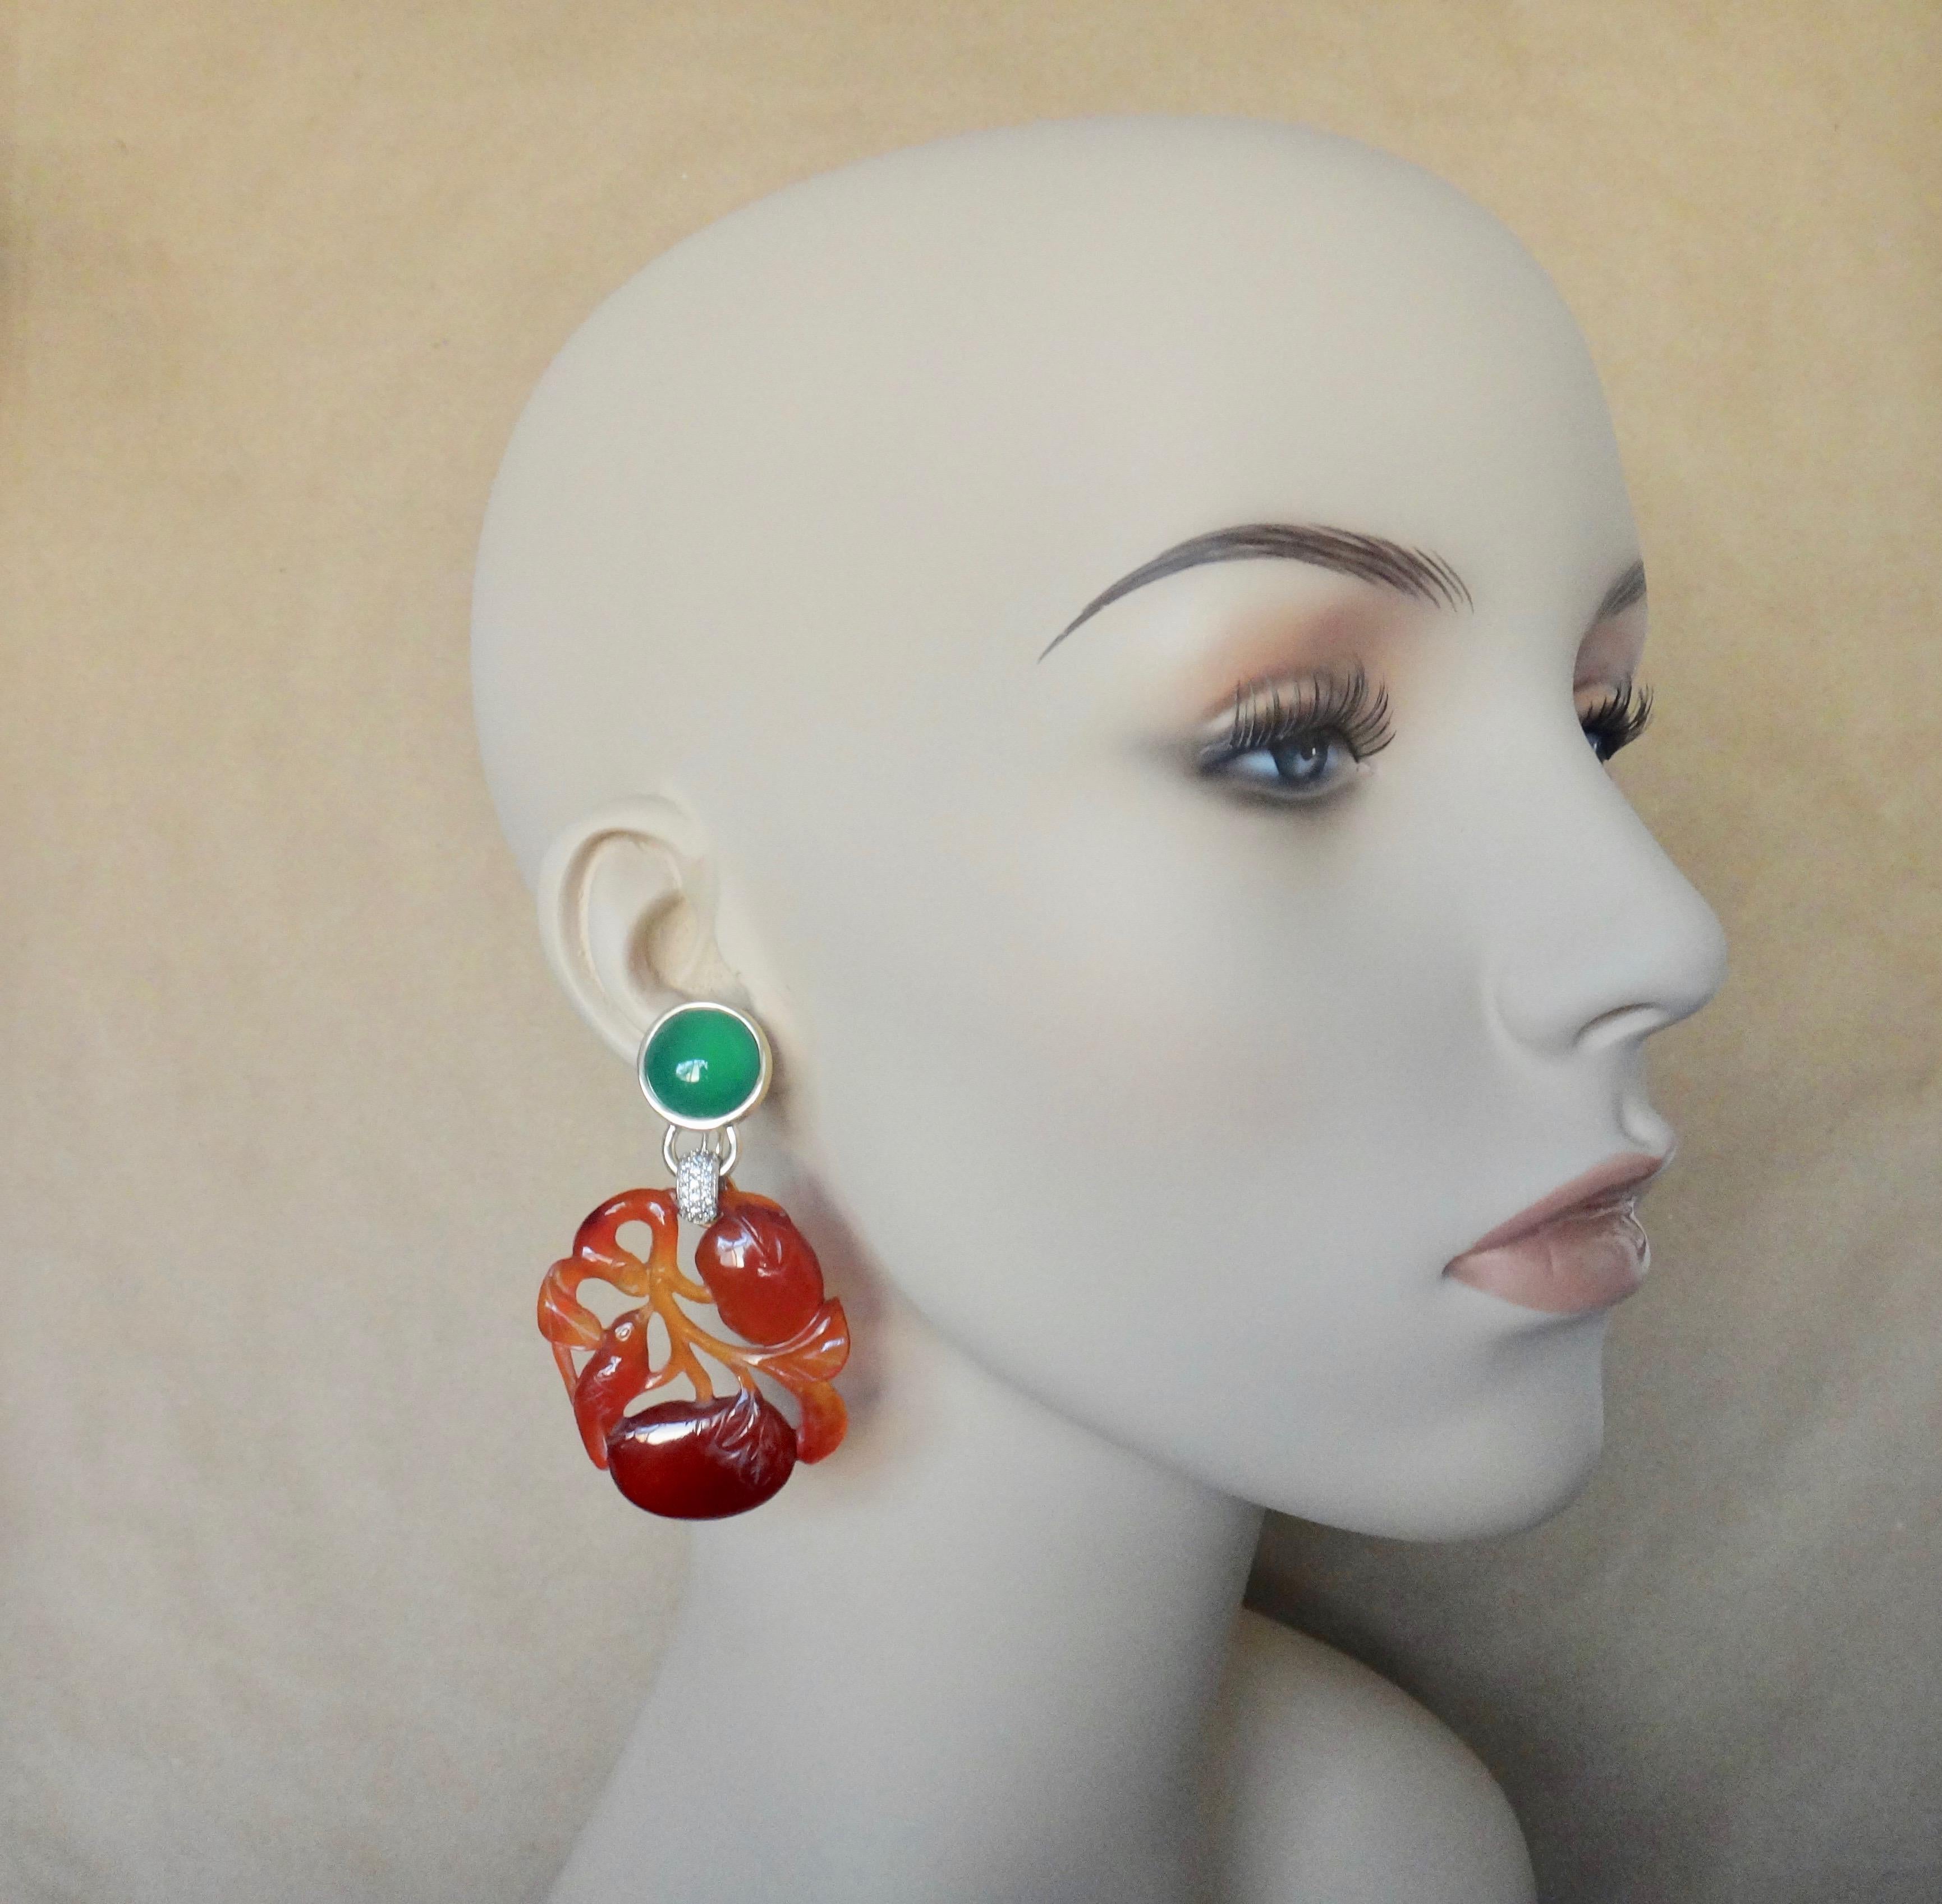 Antique Chinese plaques of carved carnelian in the form of persimmons with vines, birds and leaves are the center of attention in these dramatic dangle earrings.  The carving's exquisite craftsmanship and bold orange color is complimented by a pair